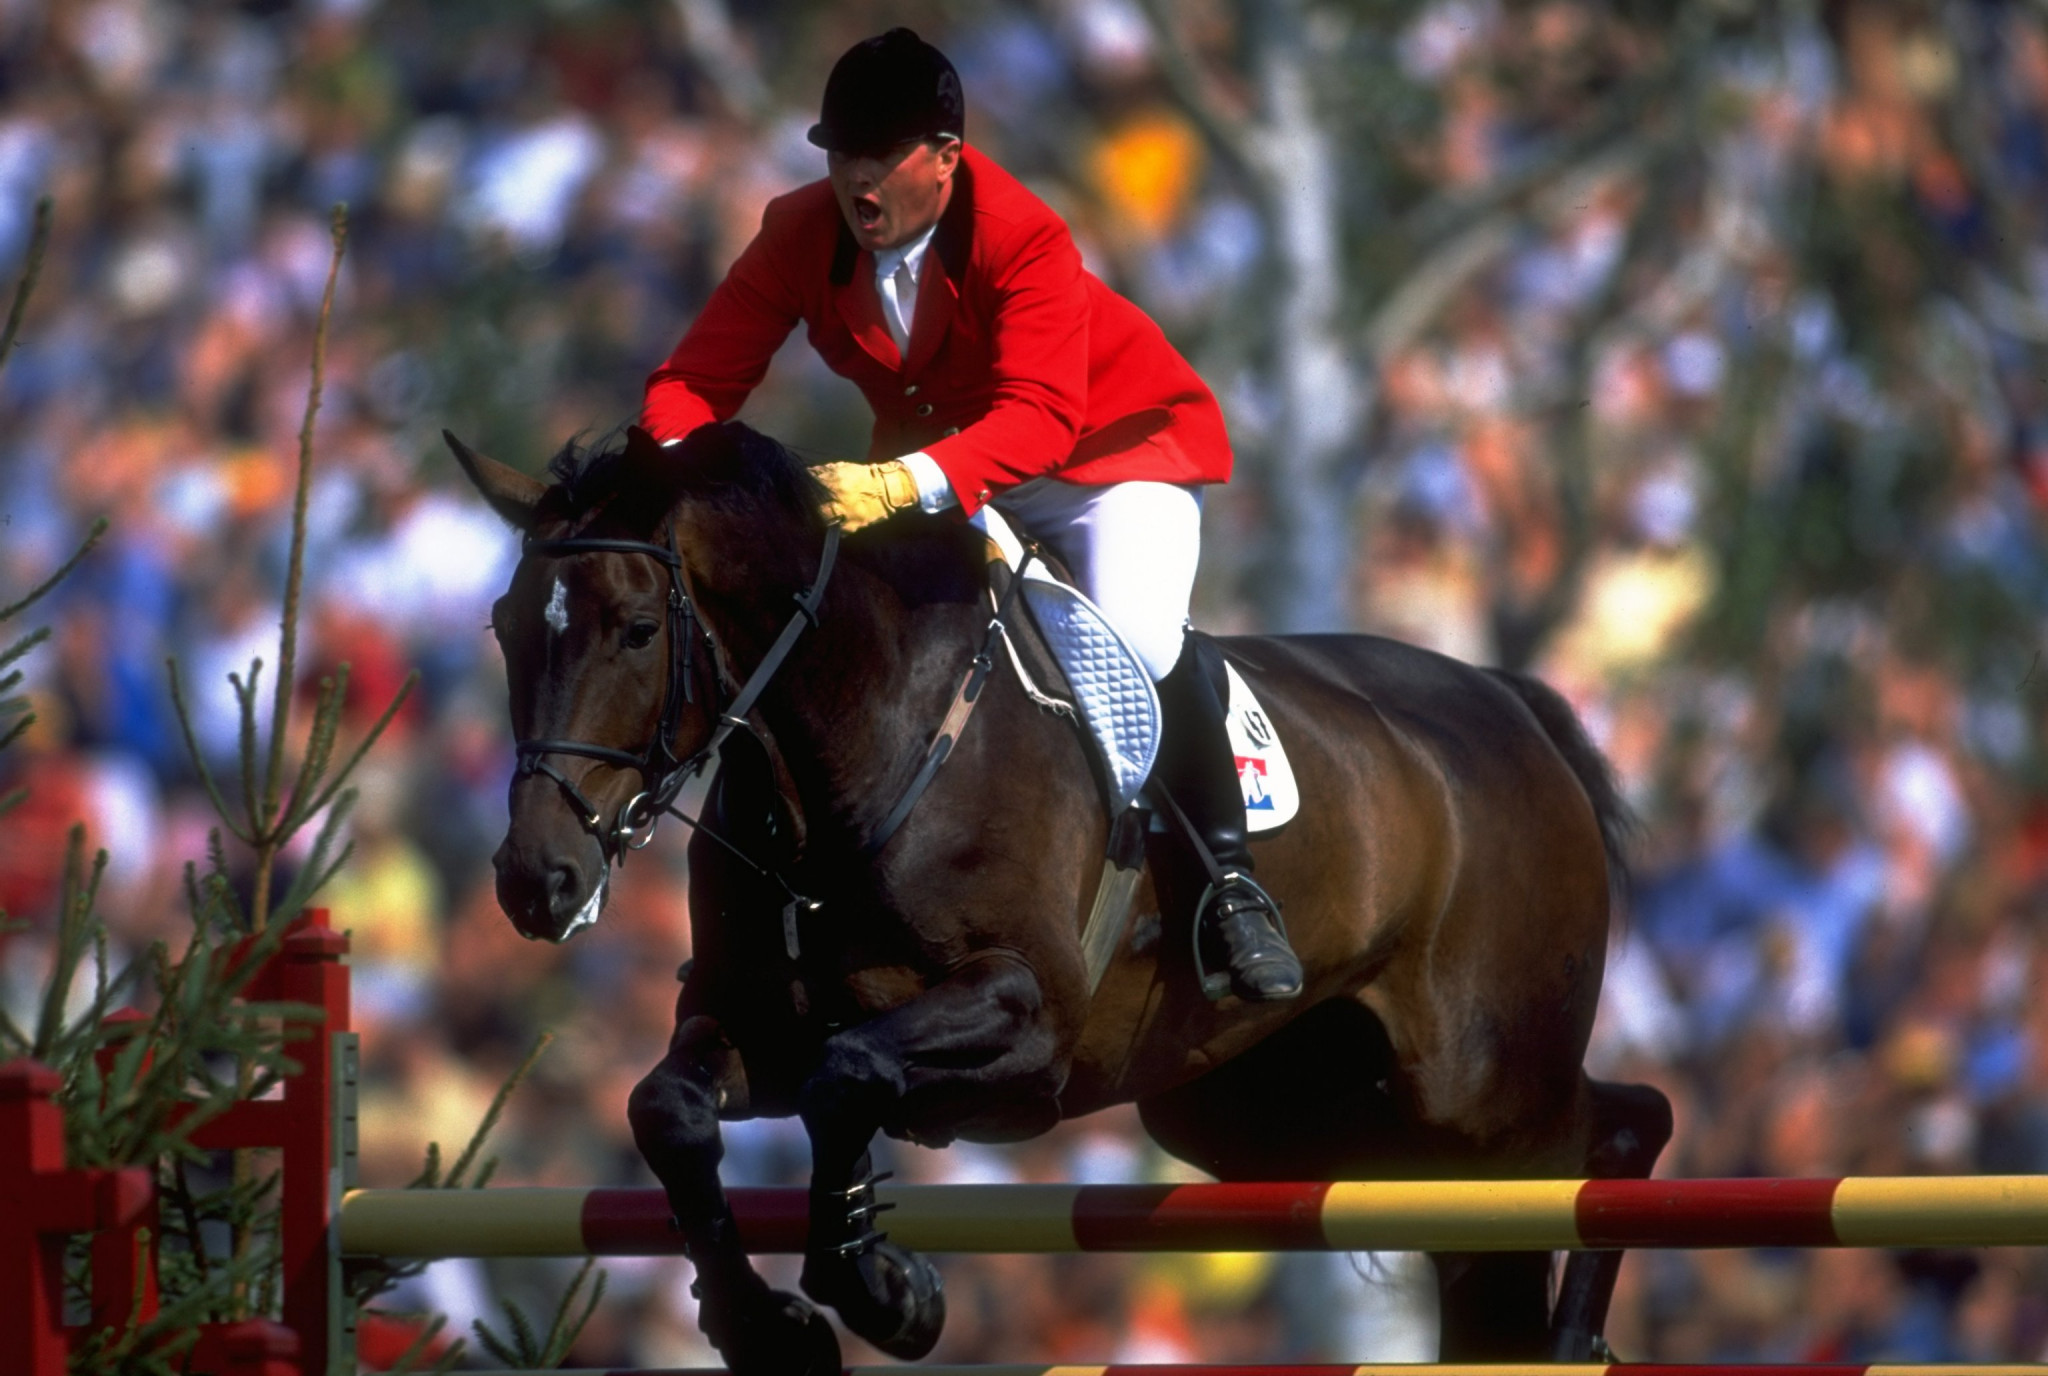 Former Olympic champion and LGCT President Jan Tops said he was 